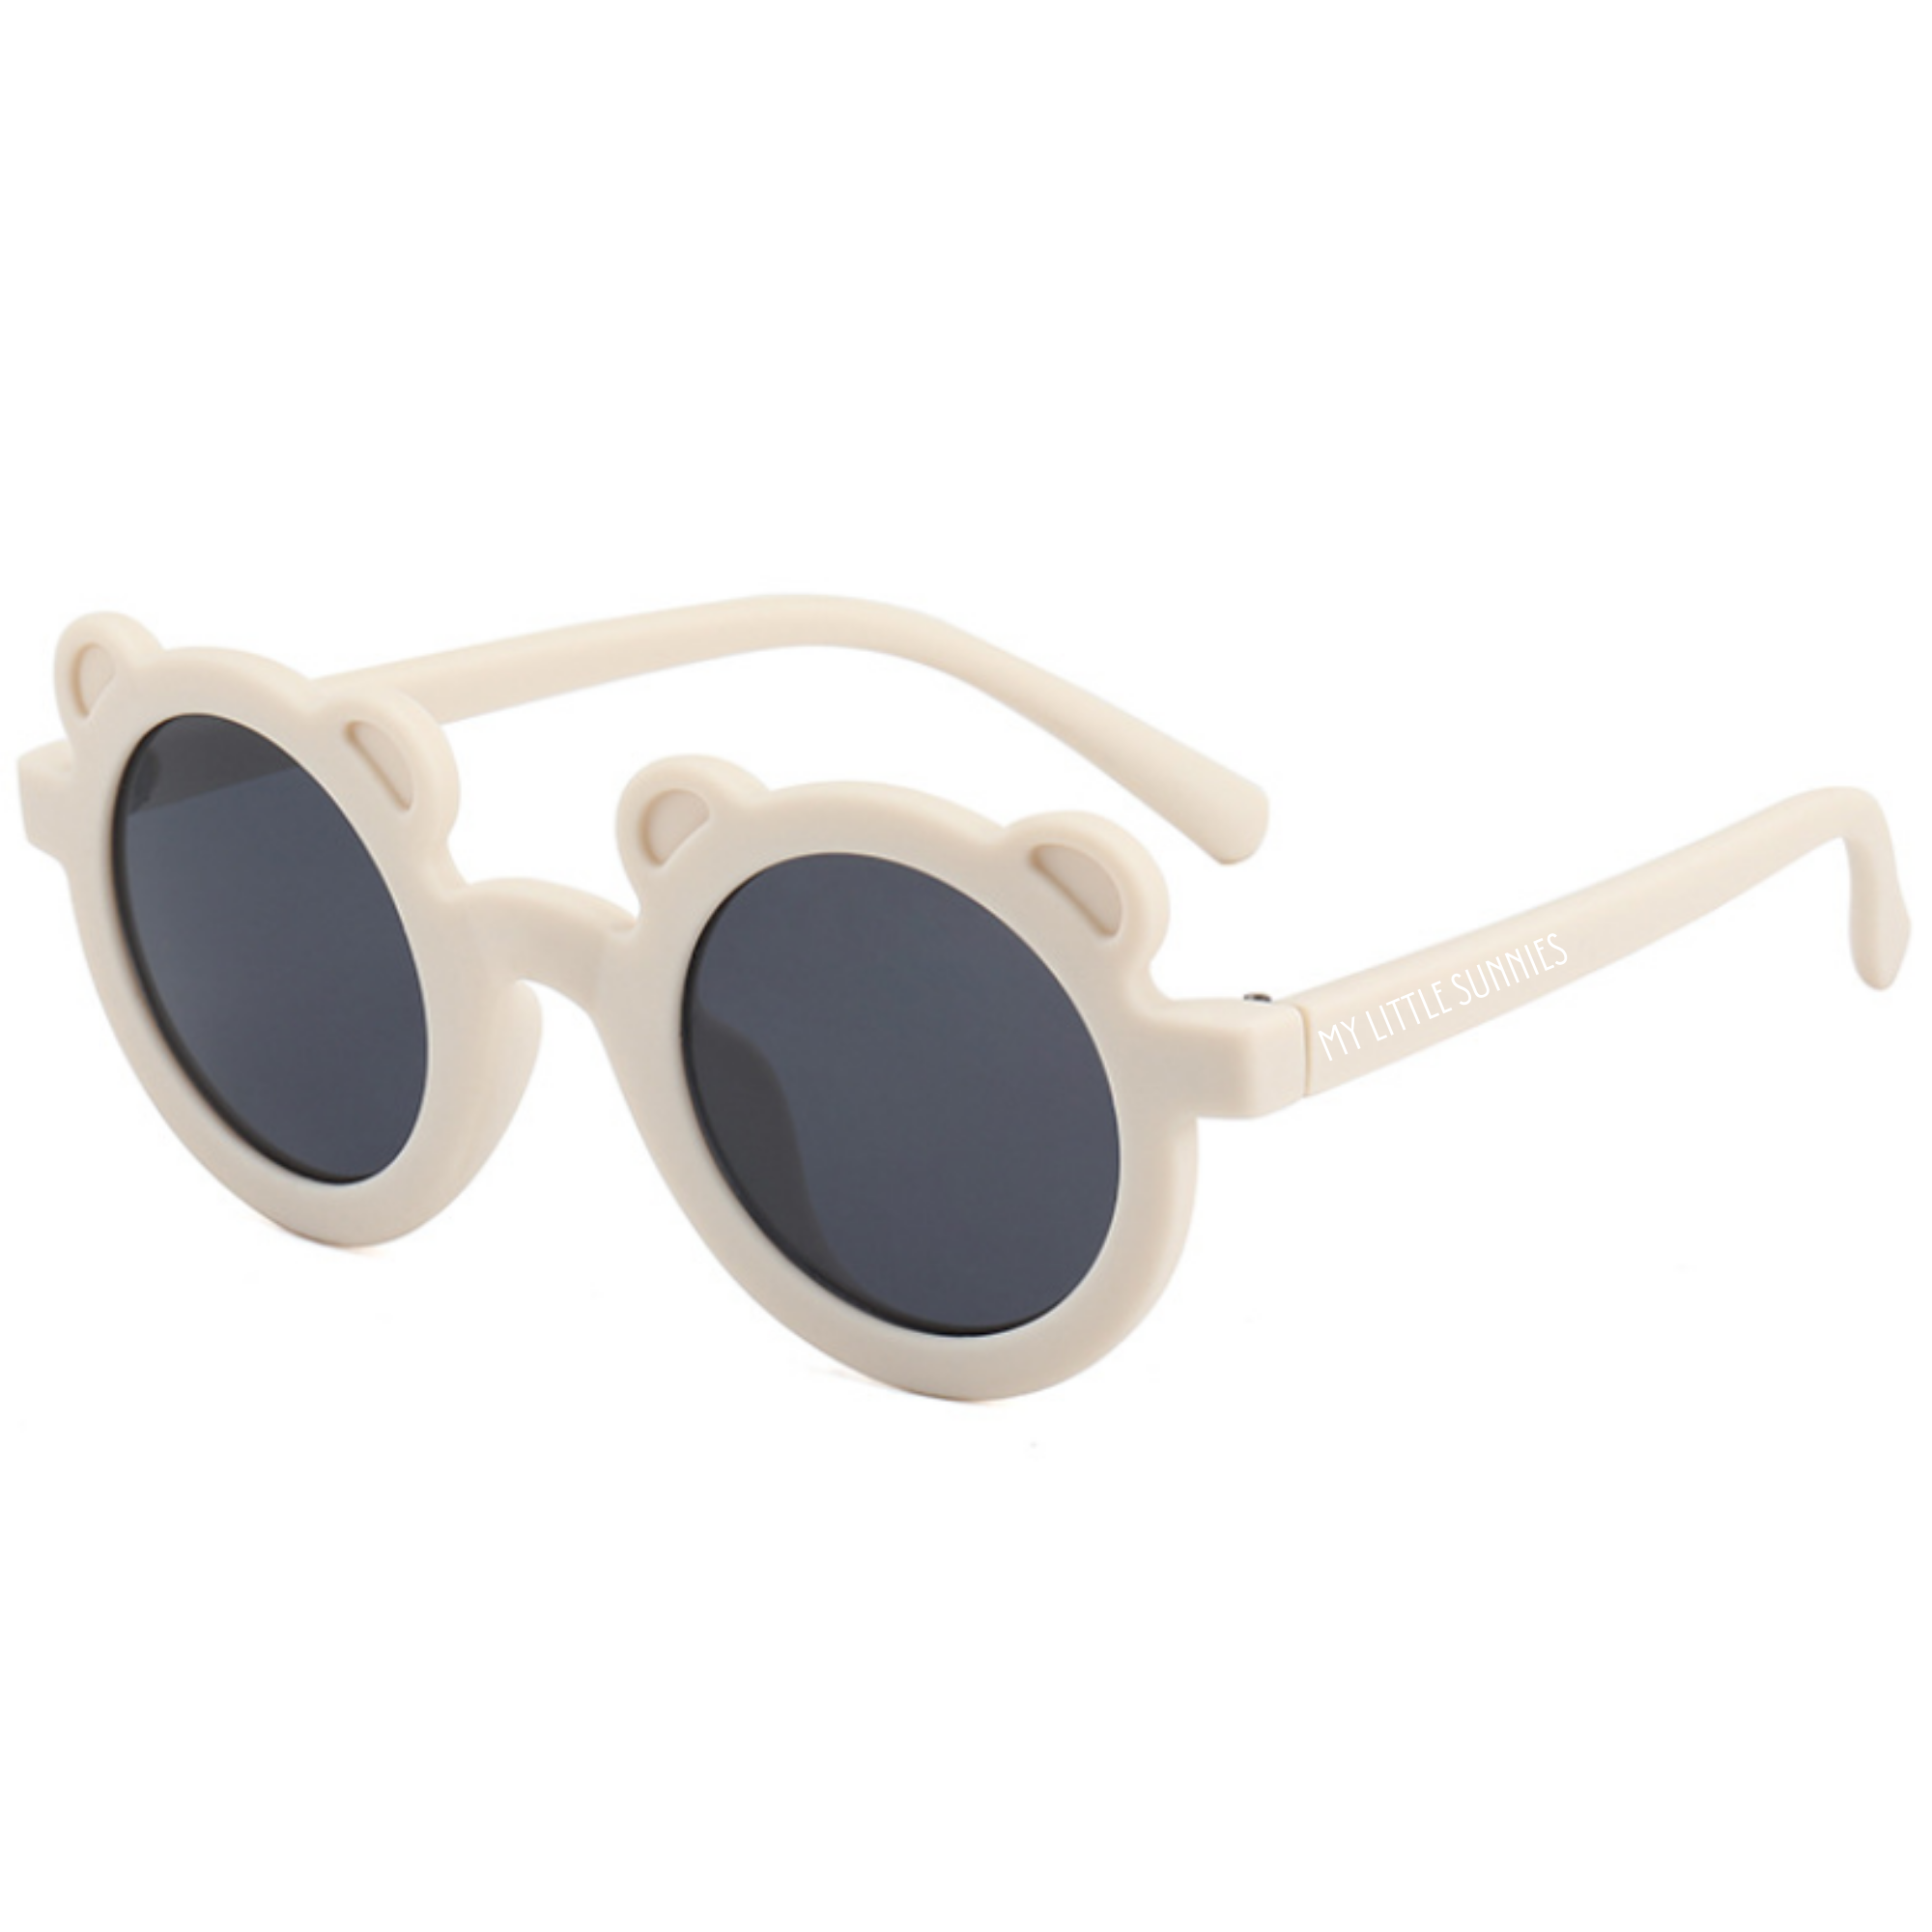 Round Bear Sunglasses - Sand Dollar Matte - Tenth and Pine - Organic Baby Clothes